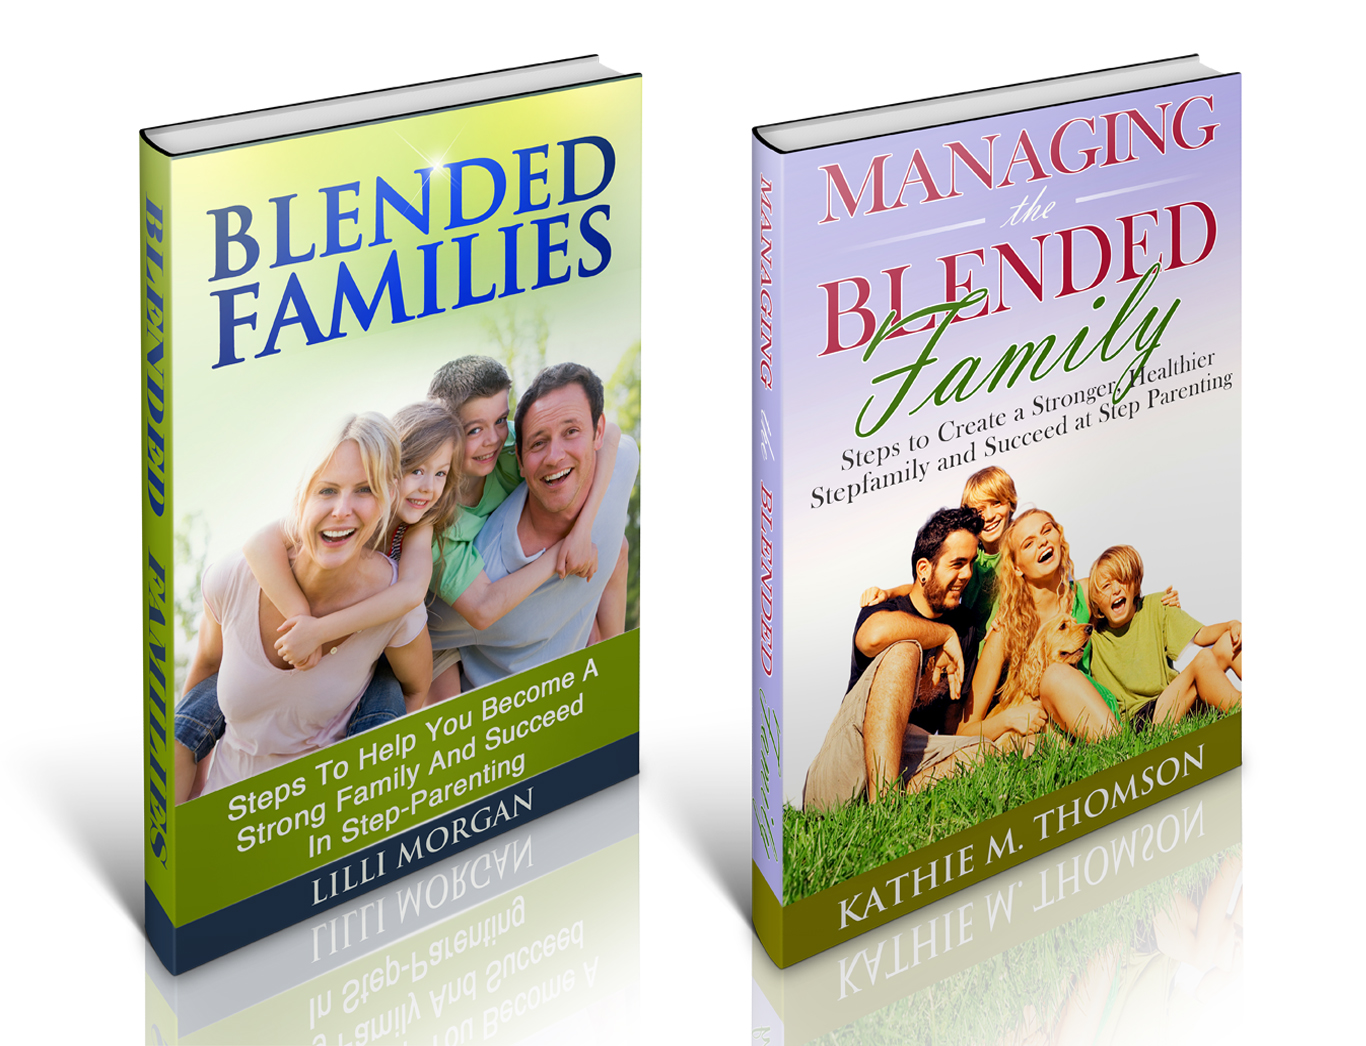 Blended Families ~ 2 in 1 Bundle ~: How to Create a Strong Step-family, Succeed in Step-parenting and Sustain a Happy Relationship by Kathie M. Thomson